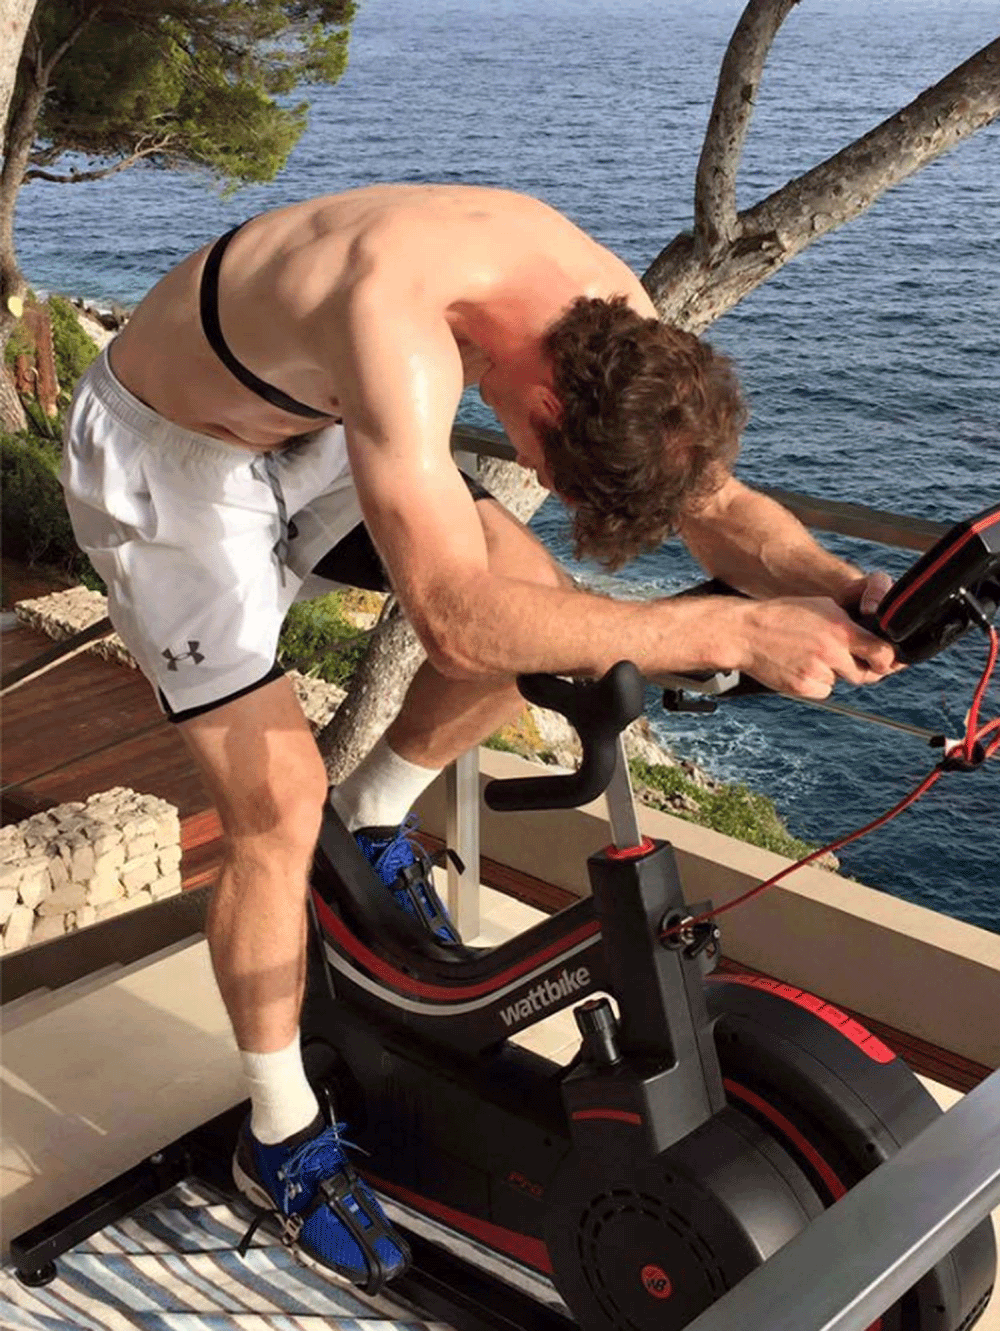 Murray isn't easing up on training ahead of the Rio Olympics